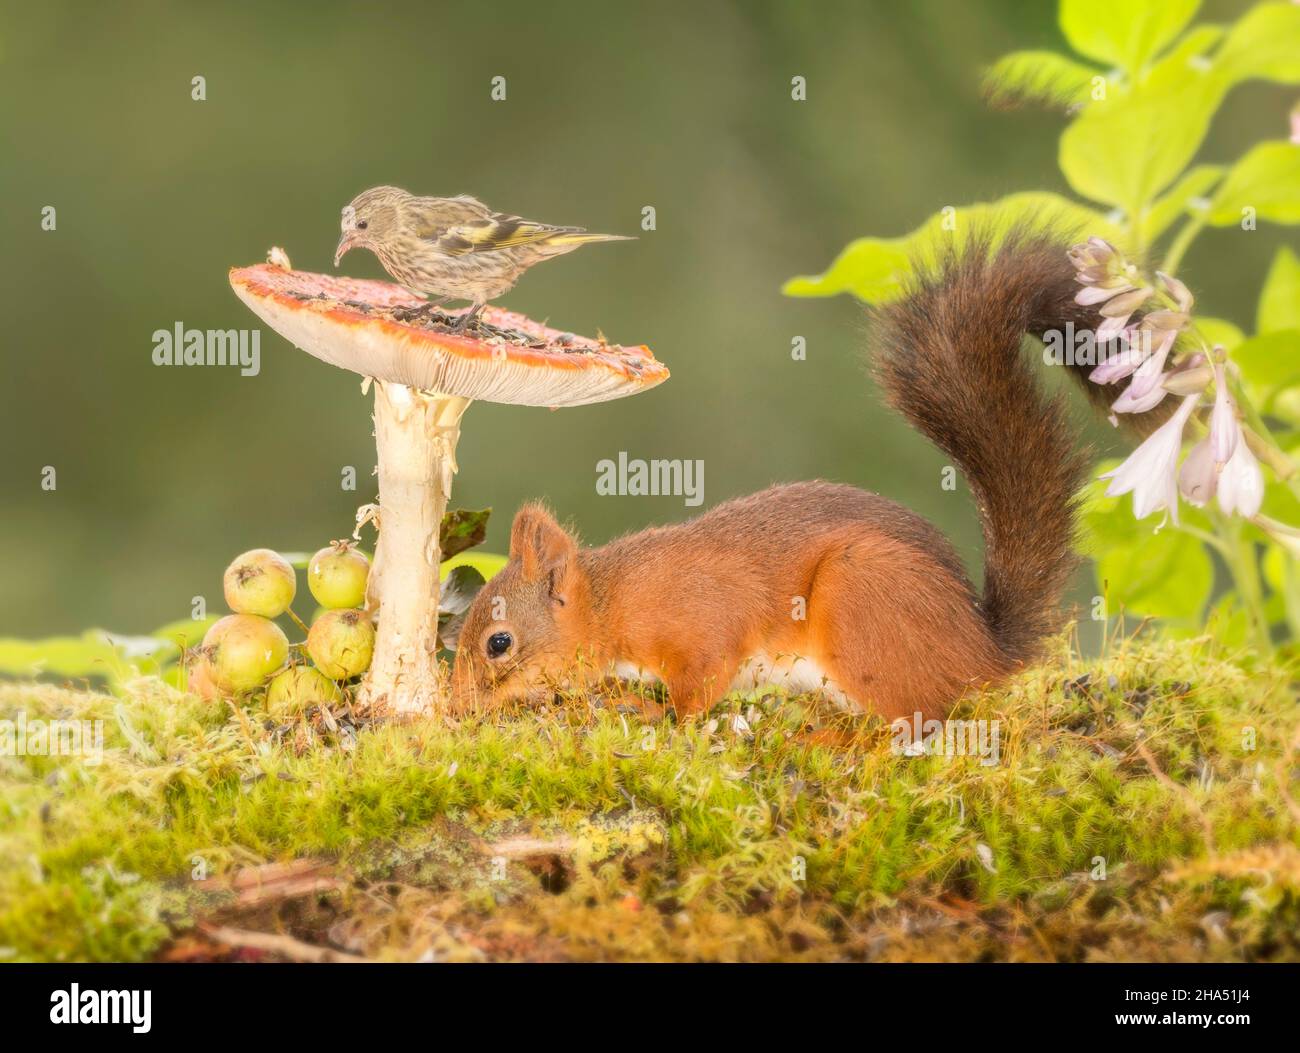 siskin standing on a mushroom with a red squirrel under it Stock Photo